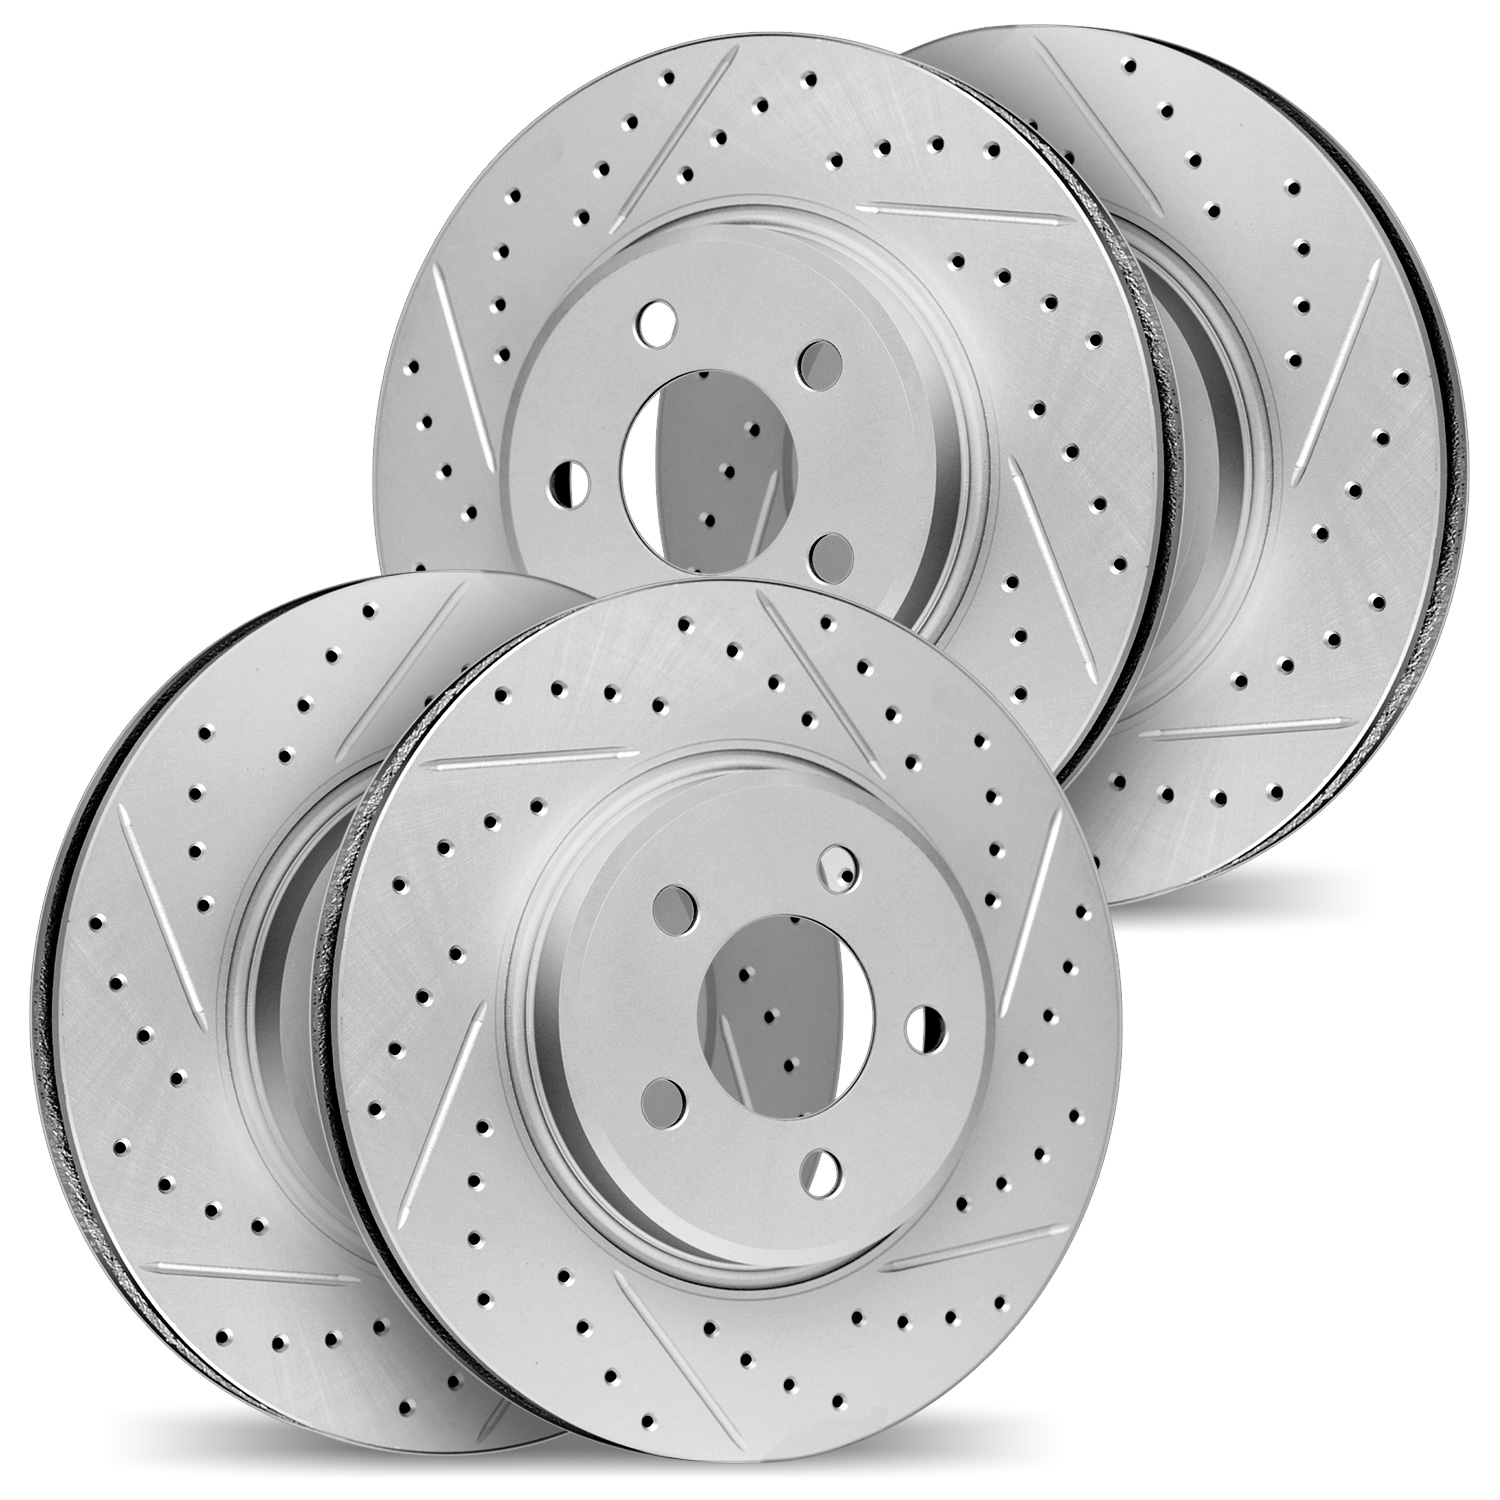 2004-63023 Geoperformance Drilled/Slotted Brake Rotors, 1998-2002 Mercedes-Benz, Position: Front and Rear